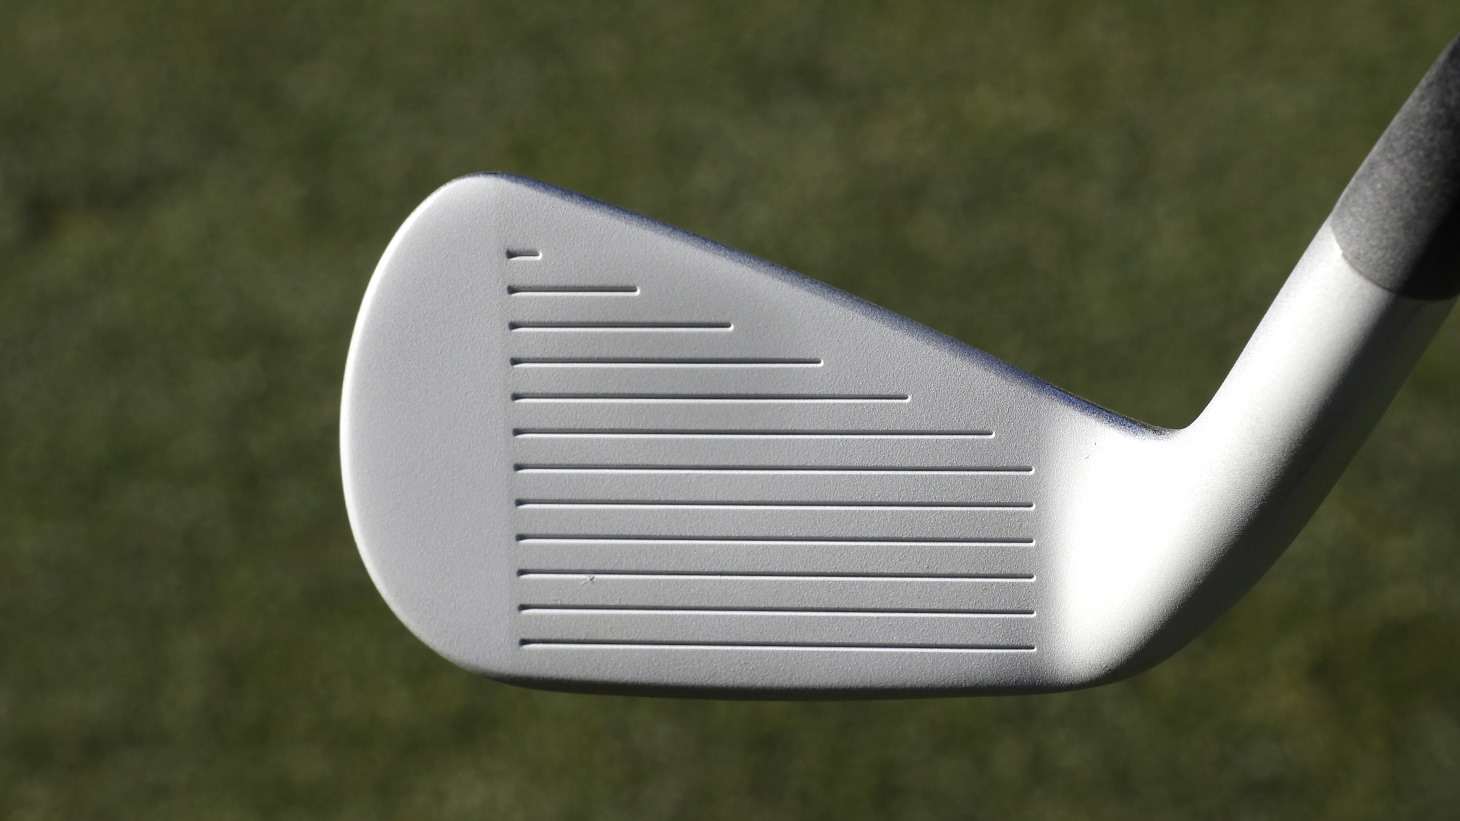 Club face after a thin coating of foot spray.